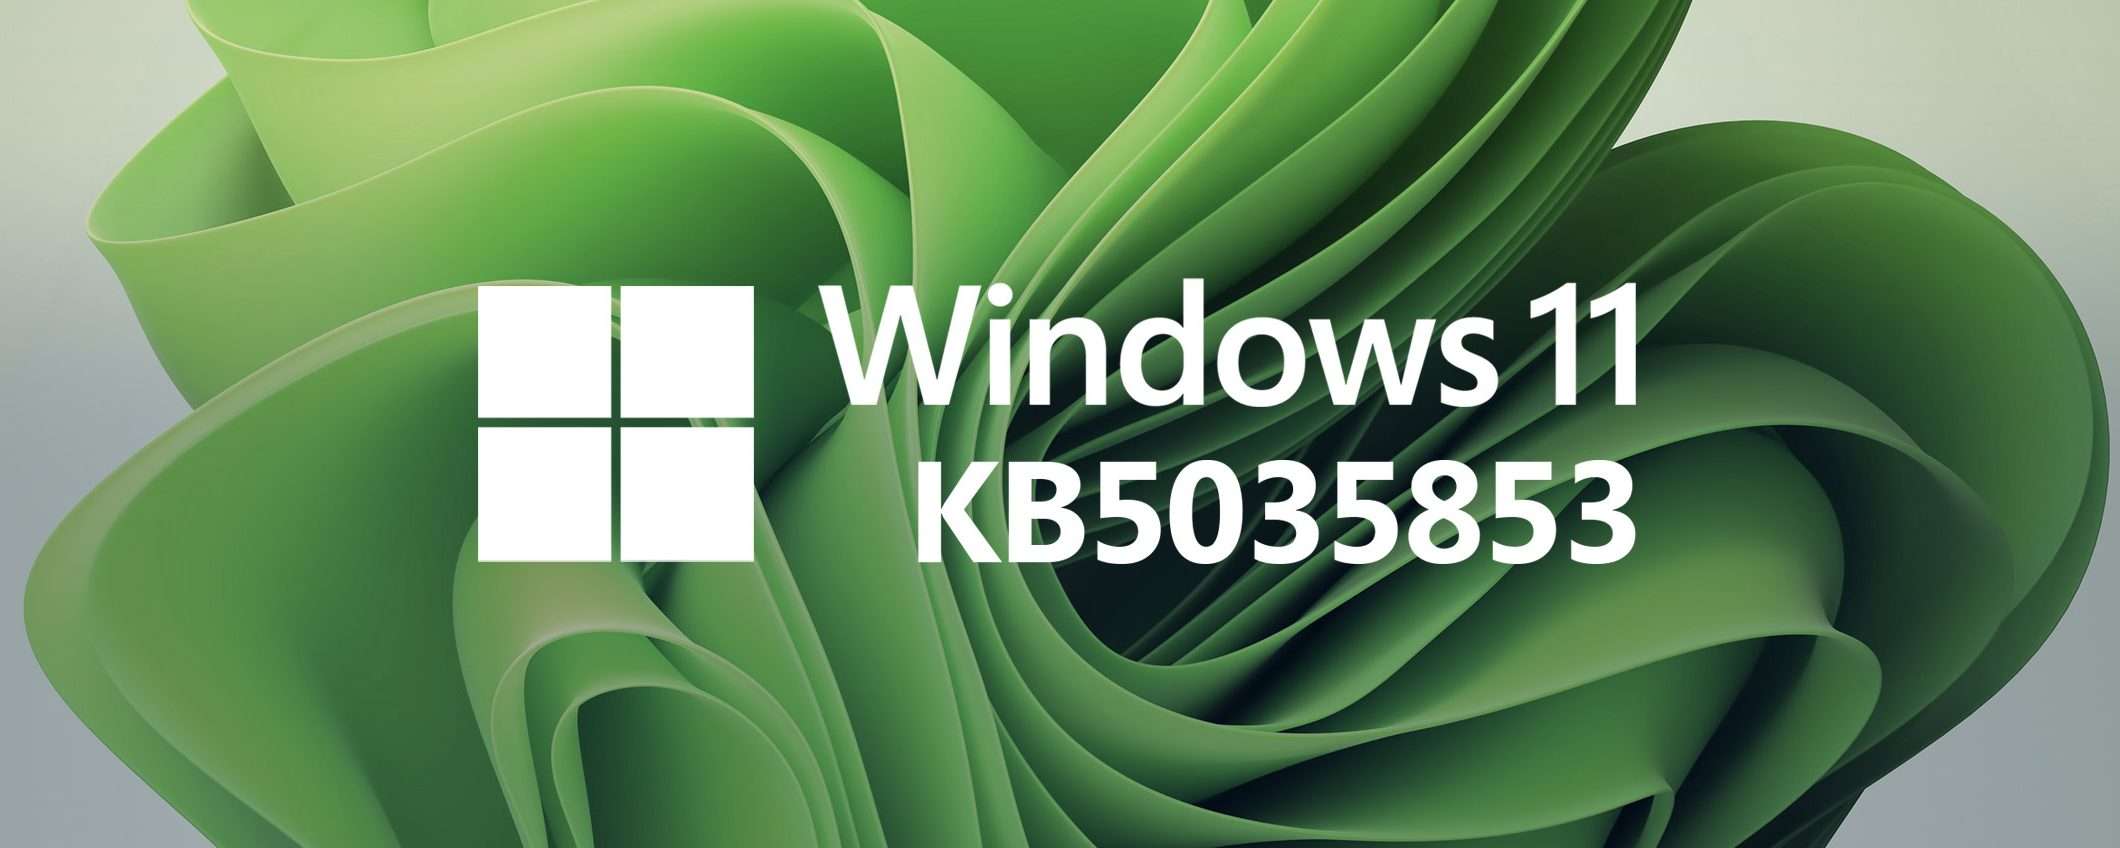 Windows 11 KB5035853 in download: è il Patch Tuesday